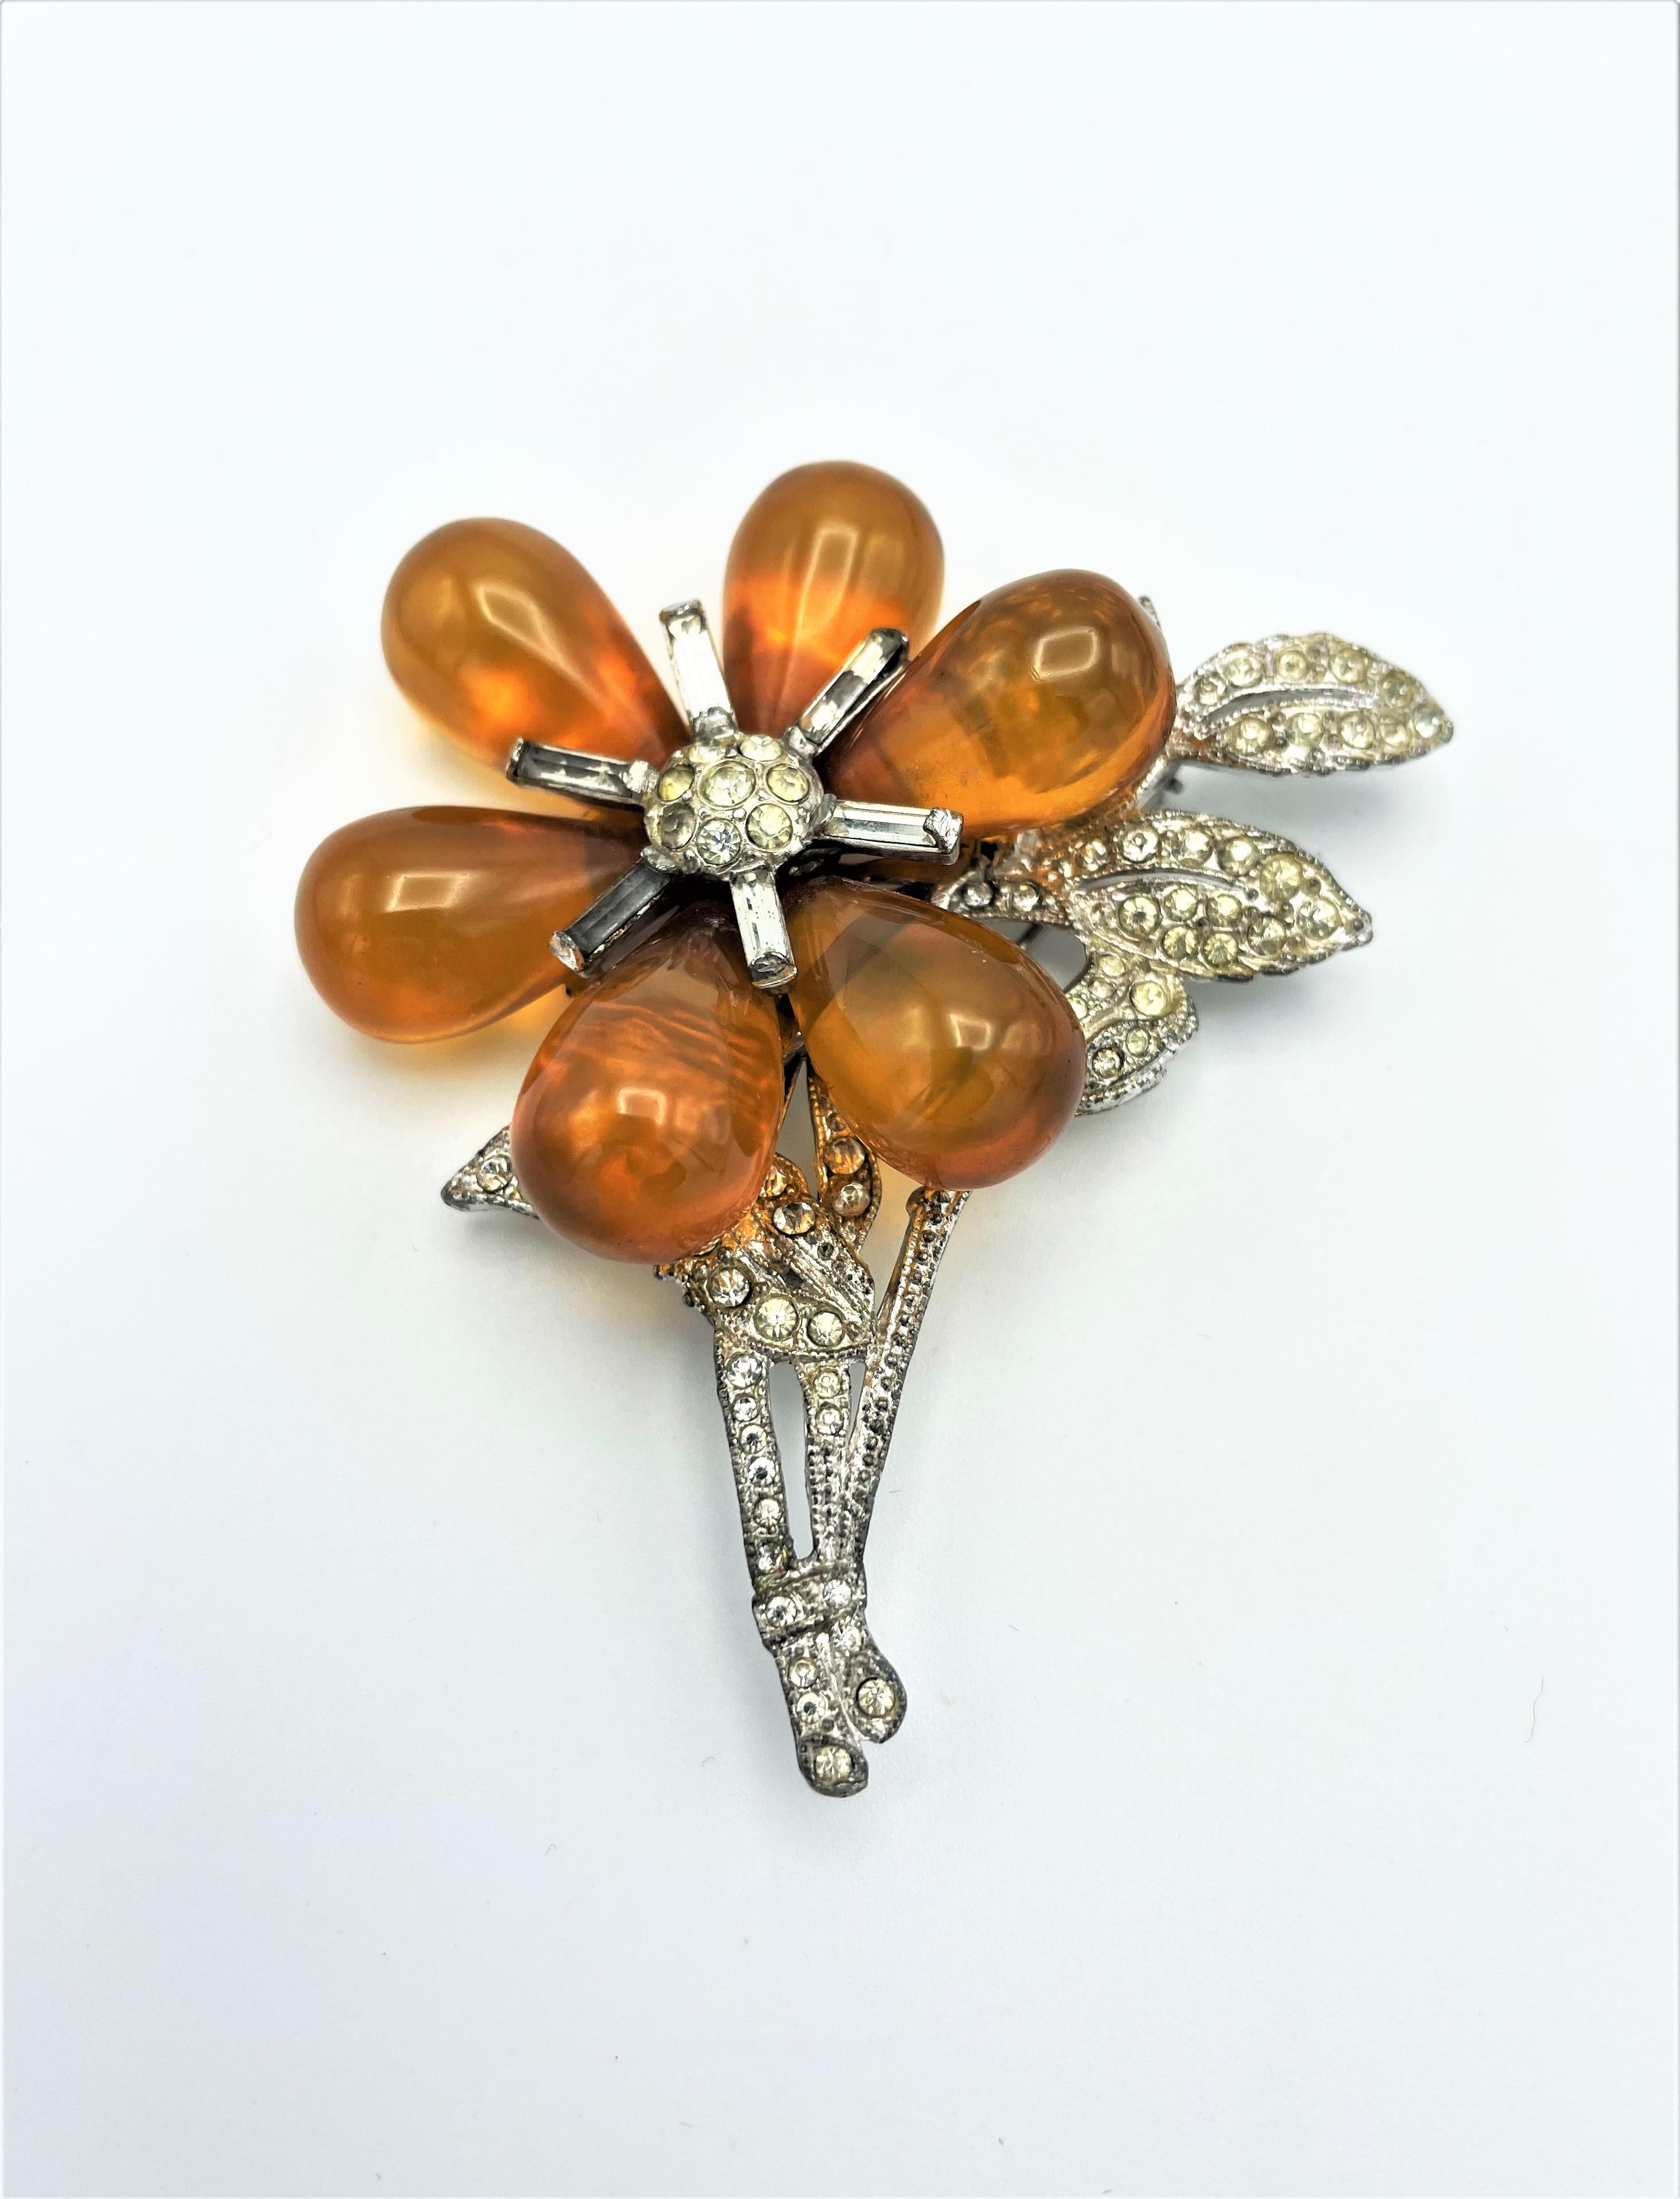 
A very unusual flower brooch from the early 1940s in the USA. The large flower consists of 6 transparent and  movable Bakelite drops. Pistils and leaves set with the finest rhinestones.
Measurement: Hight 7 cm, wide 6 cm, Bakelite drops 2 cm x 1